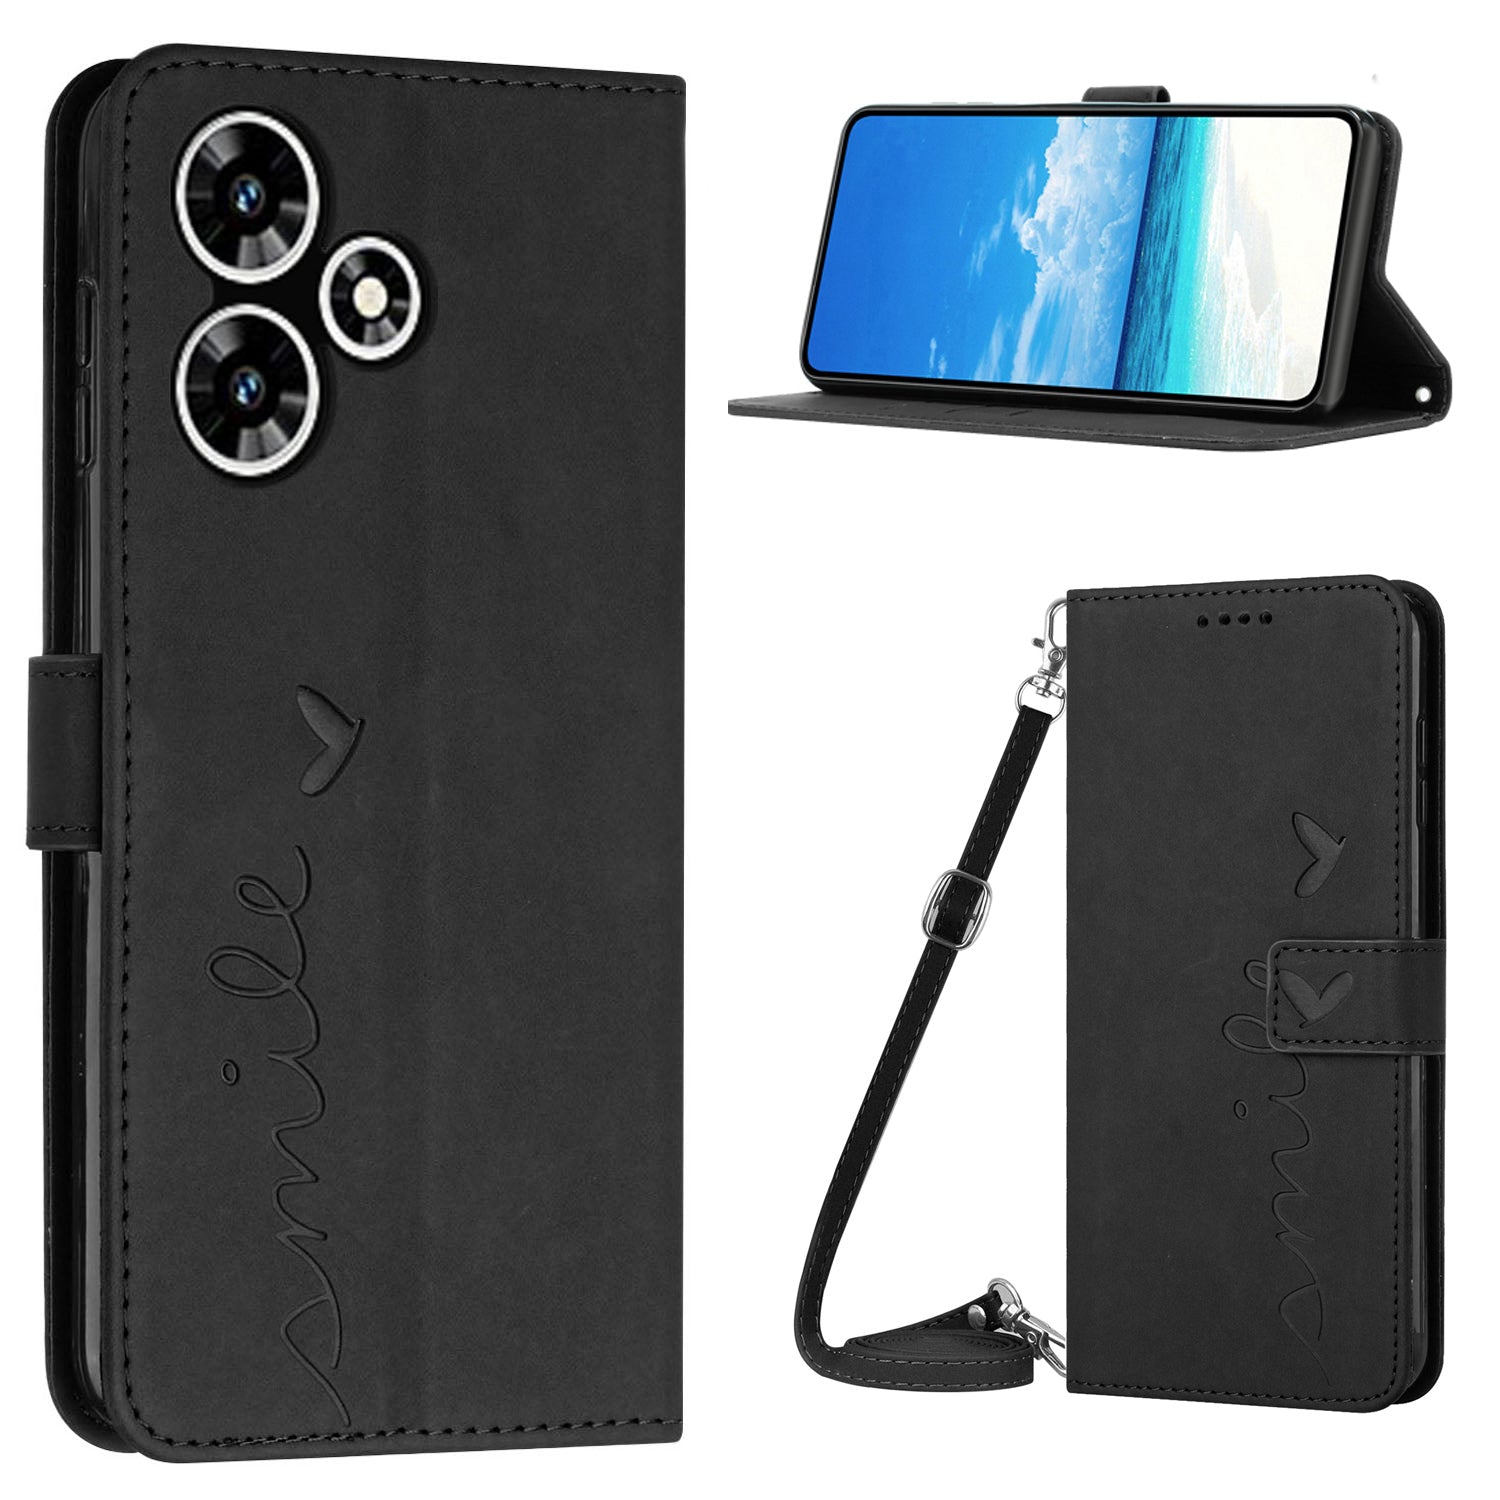 Wallet PU Leather Case for Infinix Hot 30 , Heart Shape Phone Stand Cover with Shoulder Strap - Black